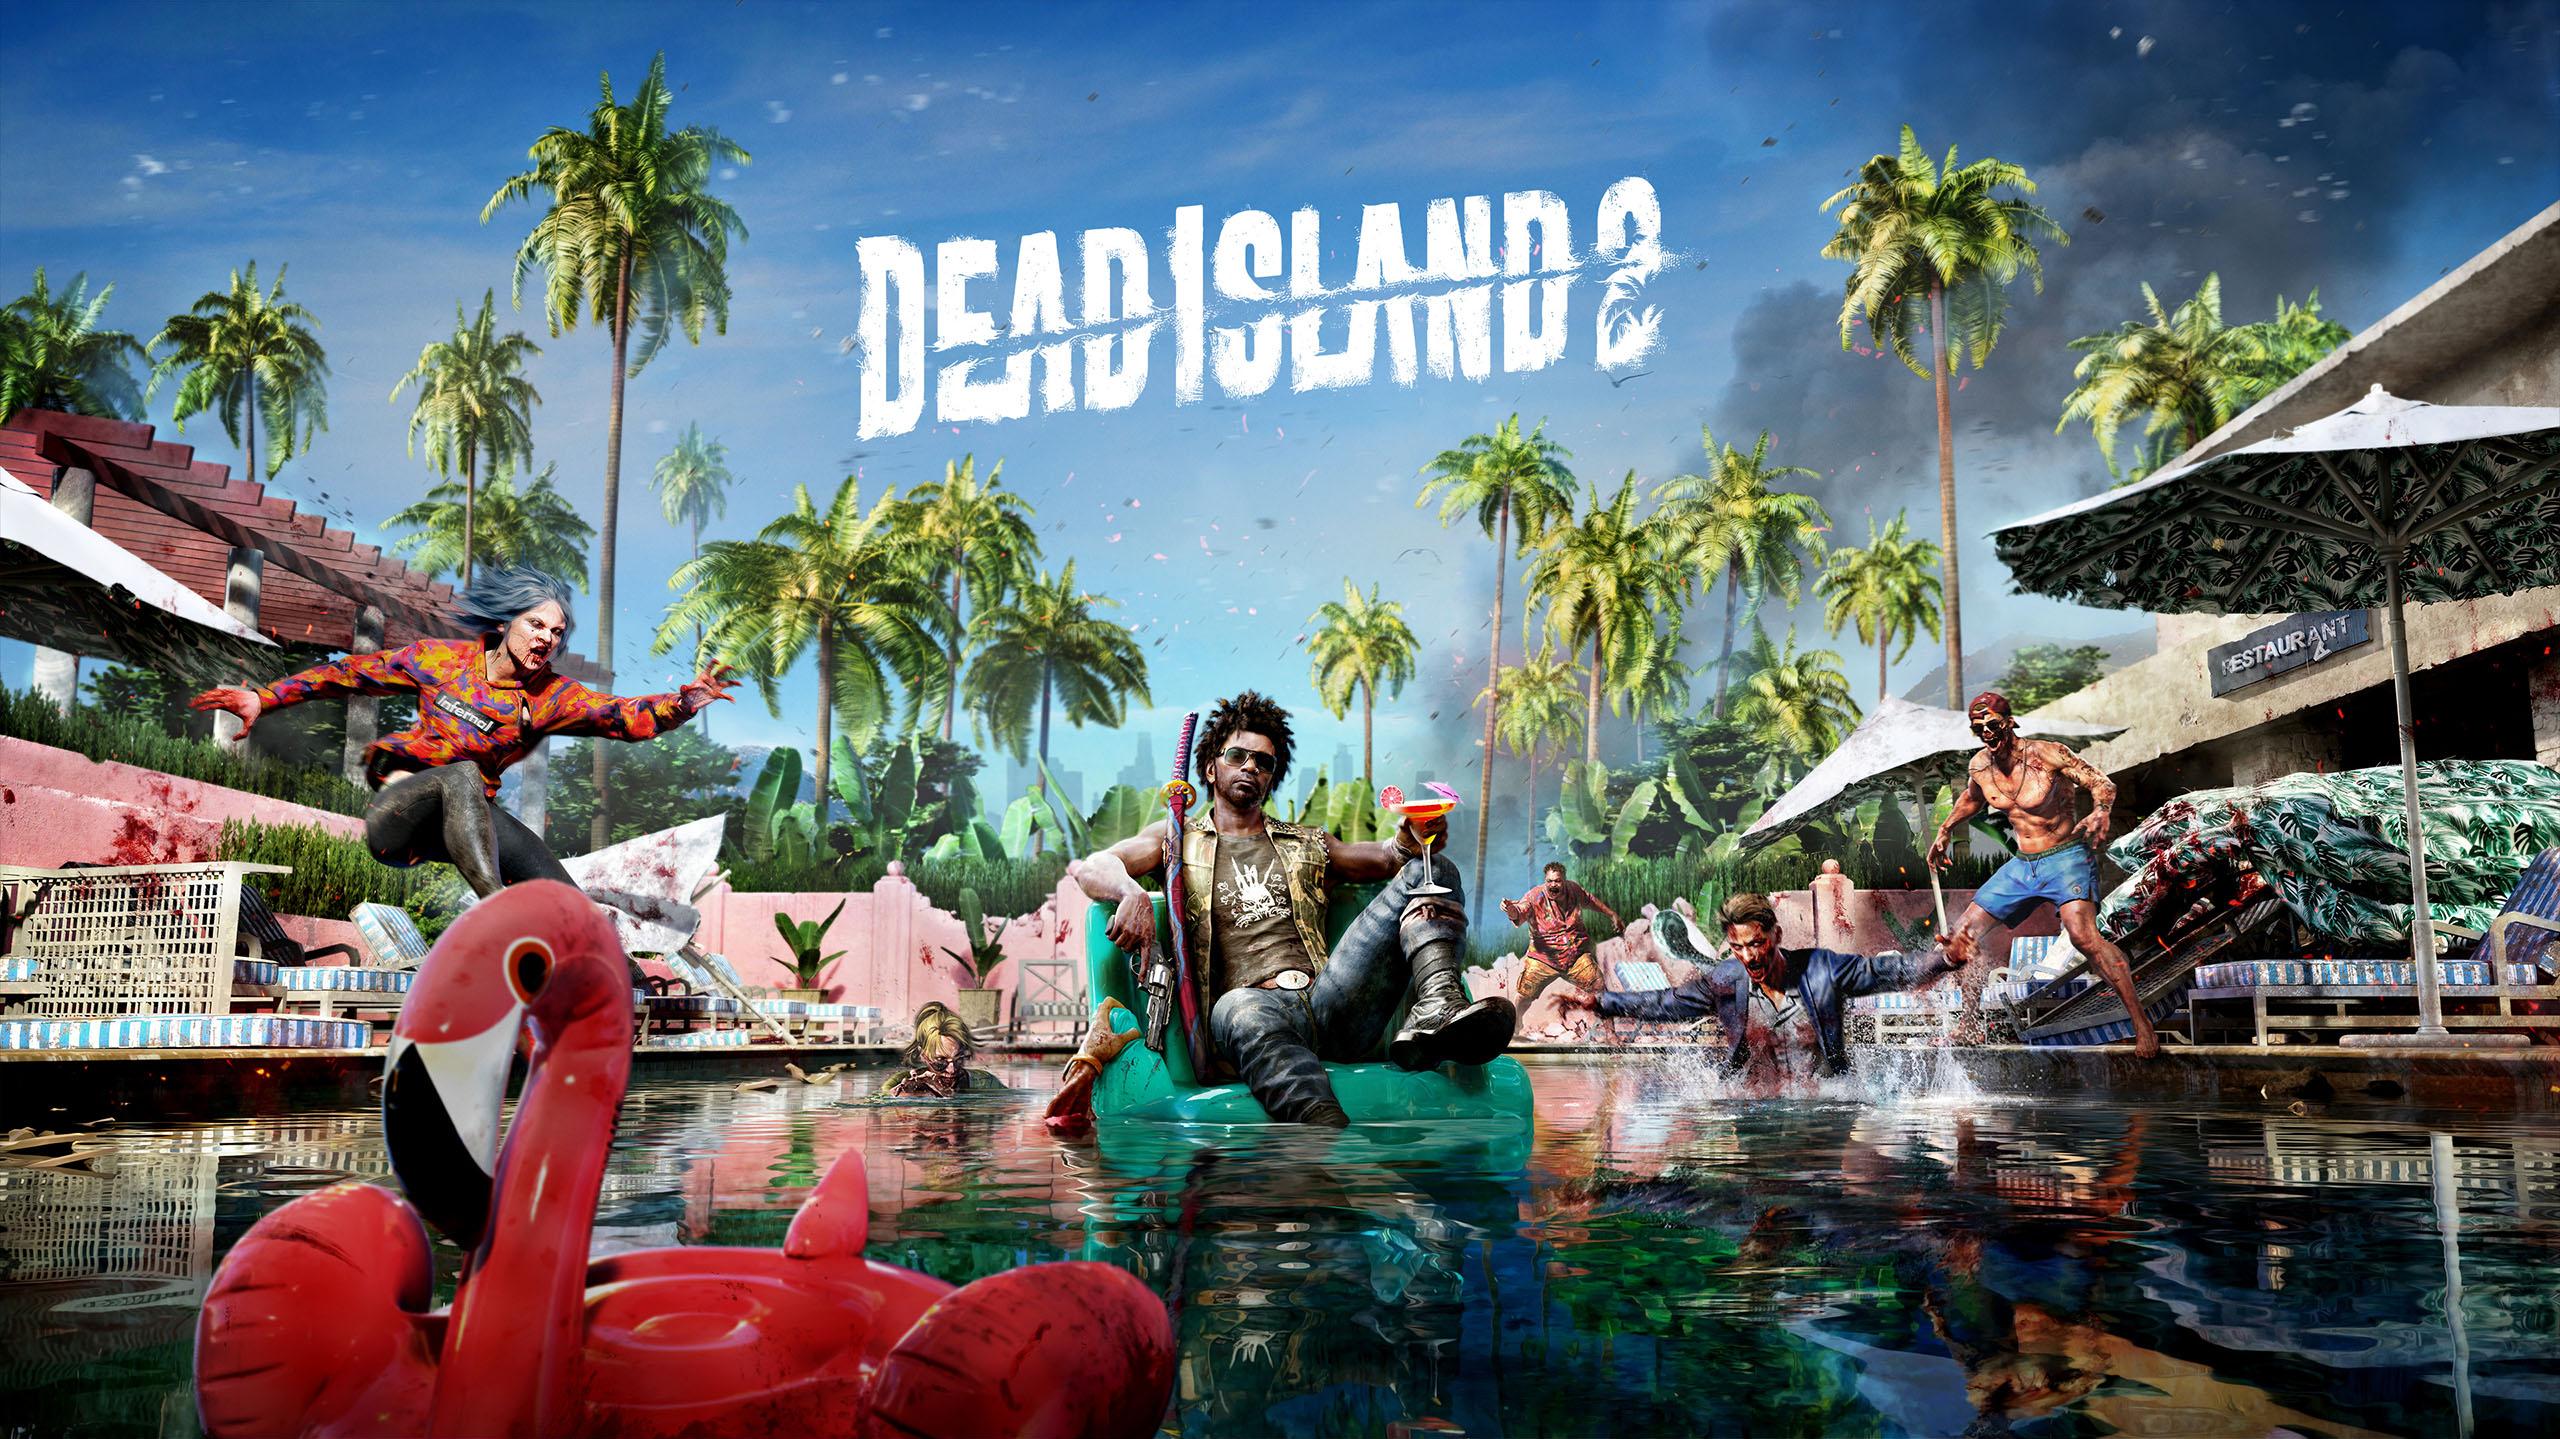 Soak Up The Scene In This Dead Island 2 Opening Cinematic   Finger